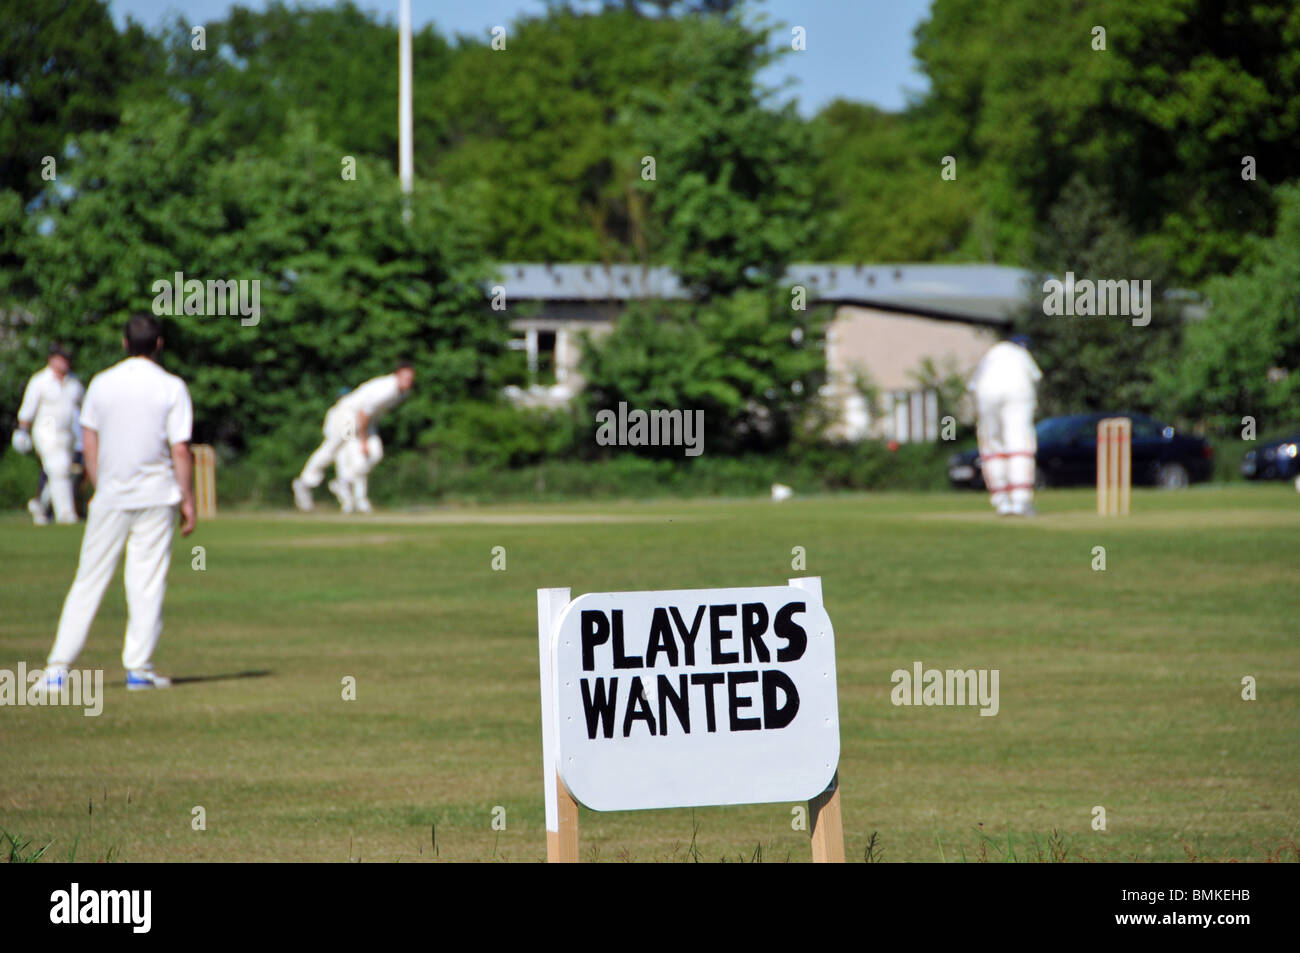 Village green cricket match and sign for players wanted Stock Photo